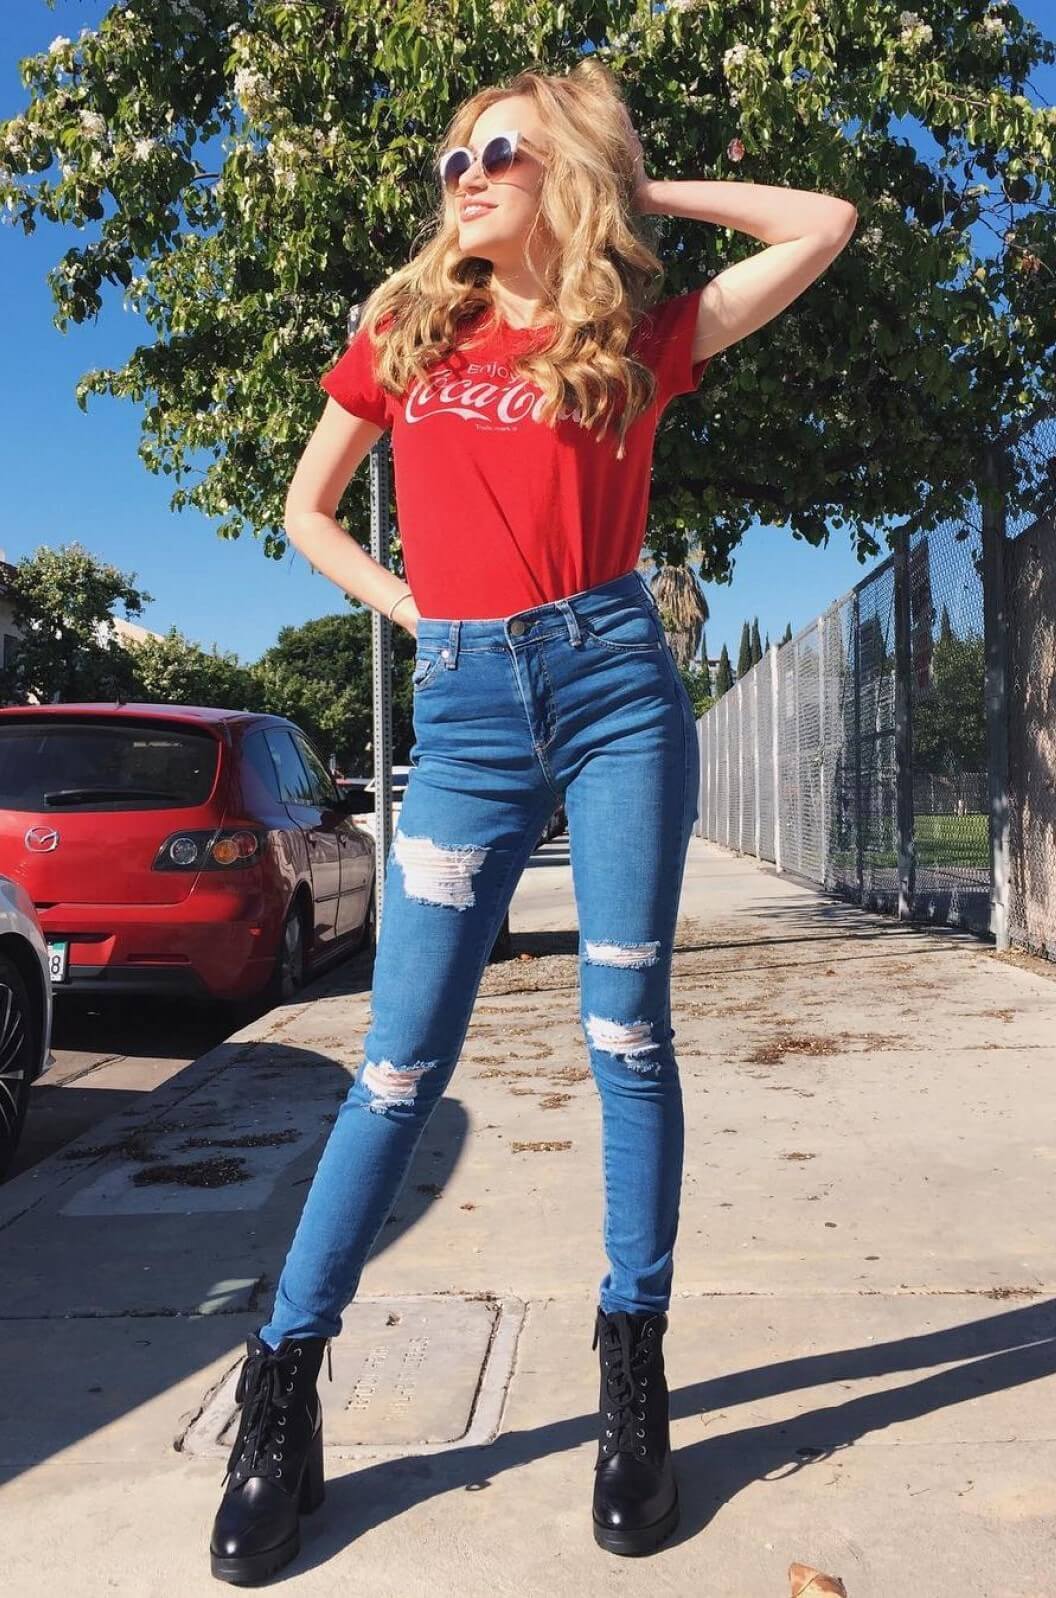 Brady Reiter In Red T-shirt & Blue denim Ripped Jeans With Cool Sunglasses